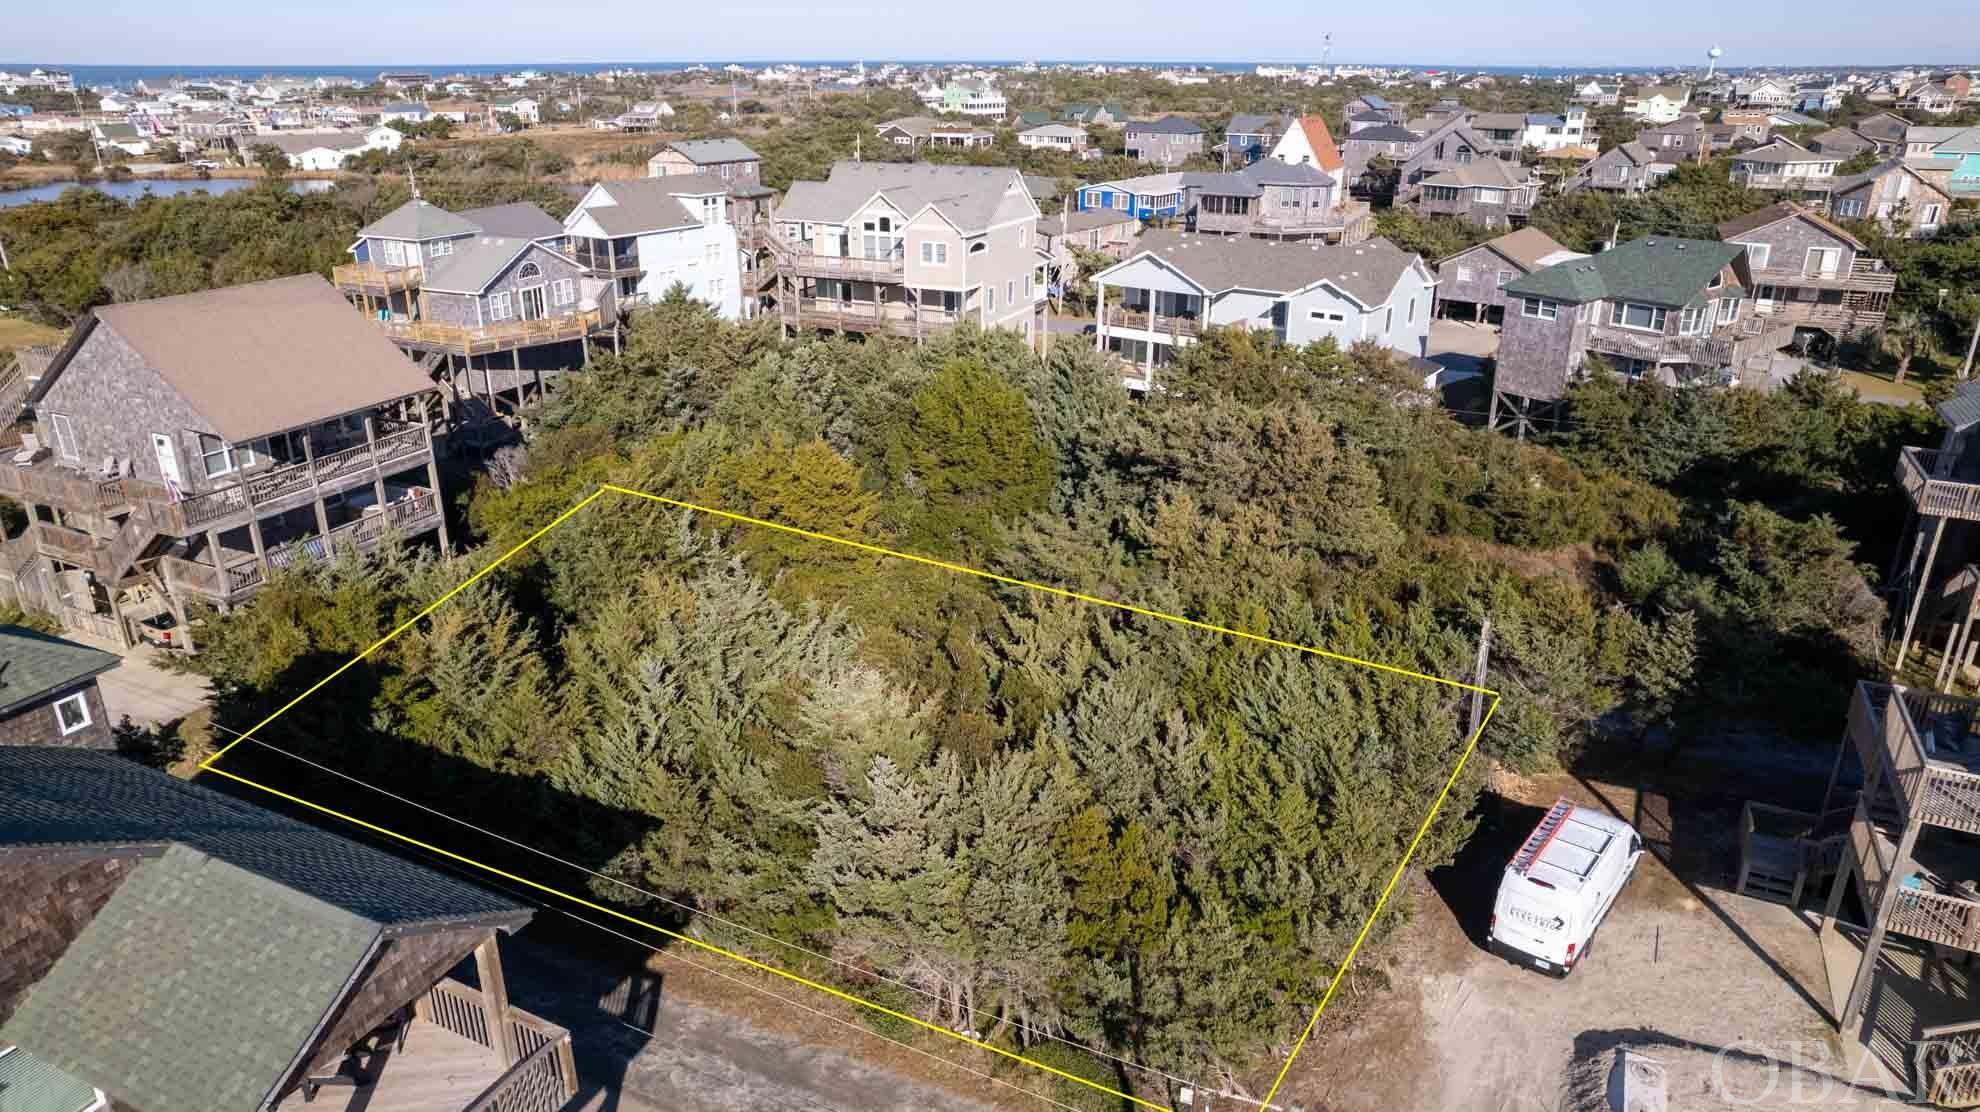 Great opportunity to be tucked in off of Woodall Way and close to the Ocean in South Hatteras. Just a short walk or golfcart ride to Marinas, restaurants and ramp 55.